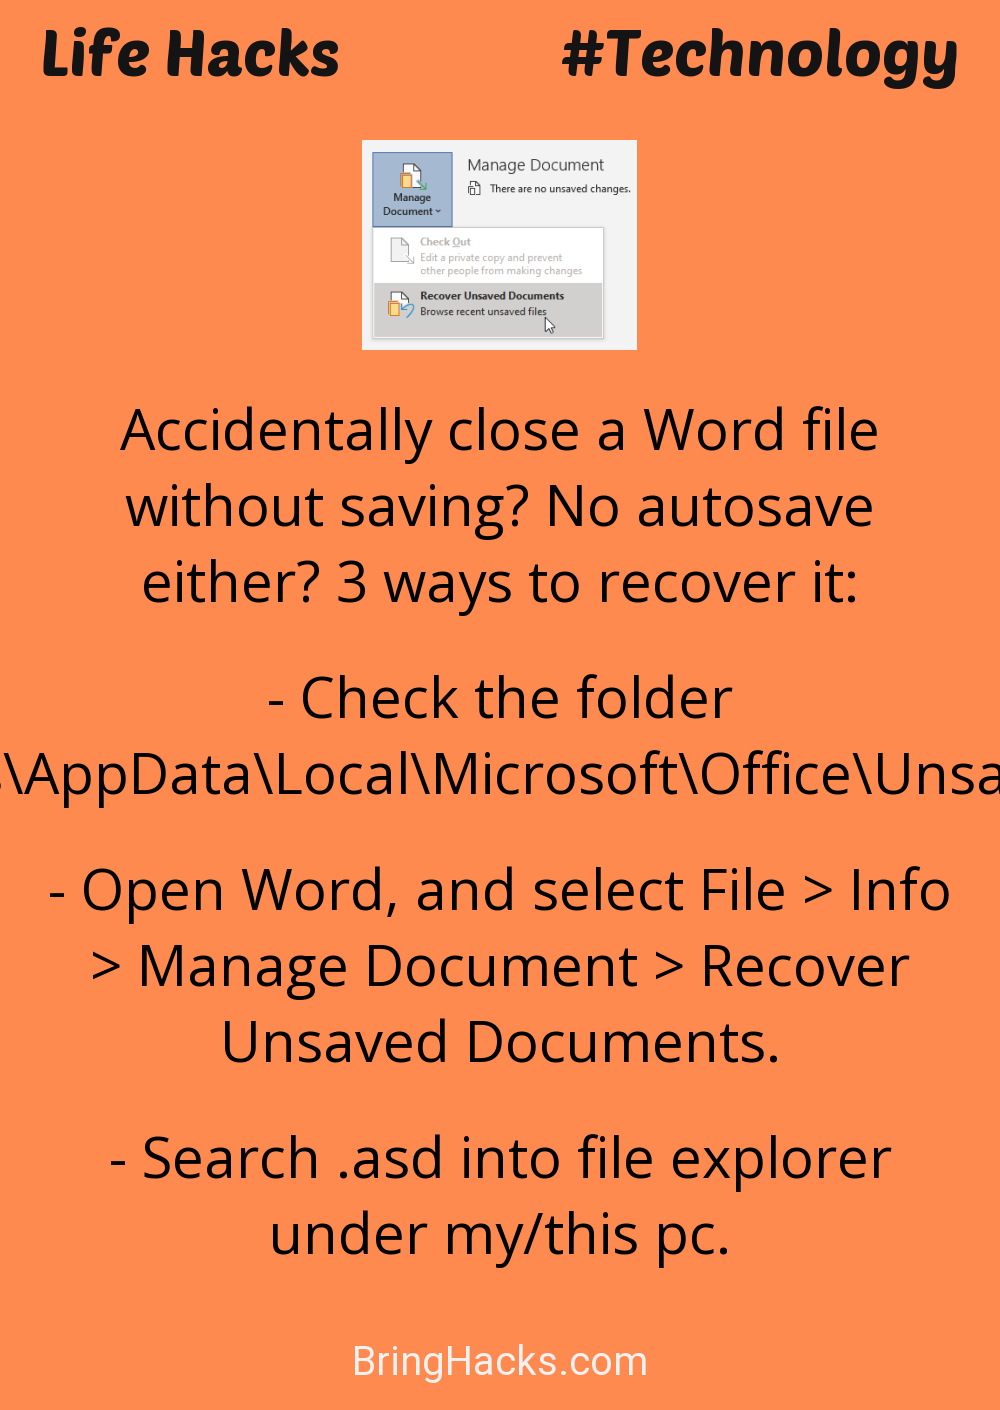 Life Hacks: - Accidentally close a Word file without saving? No autosave either? 3 ways to recover it:
Check the folder C:\Users\AppData\Local\Microsoft\Office\UnsavedFilesOpen Word, and select File > Info > Manage Document > Recover Unsaved Documents.Search .asd into file explorer under my/this pc.